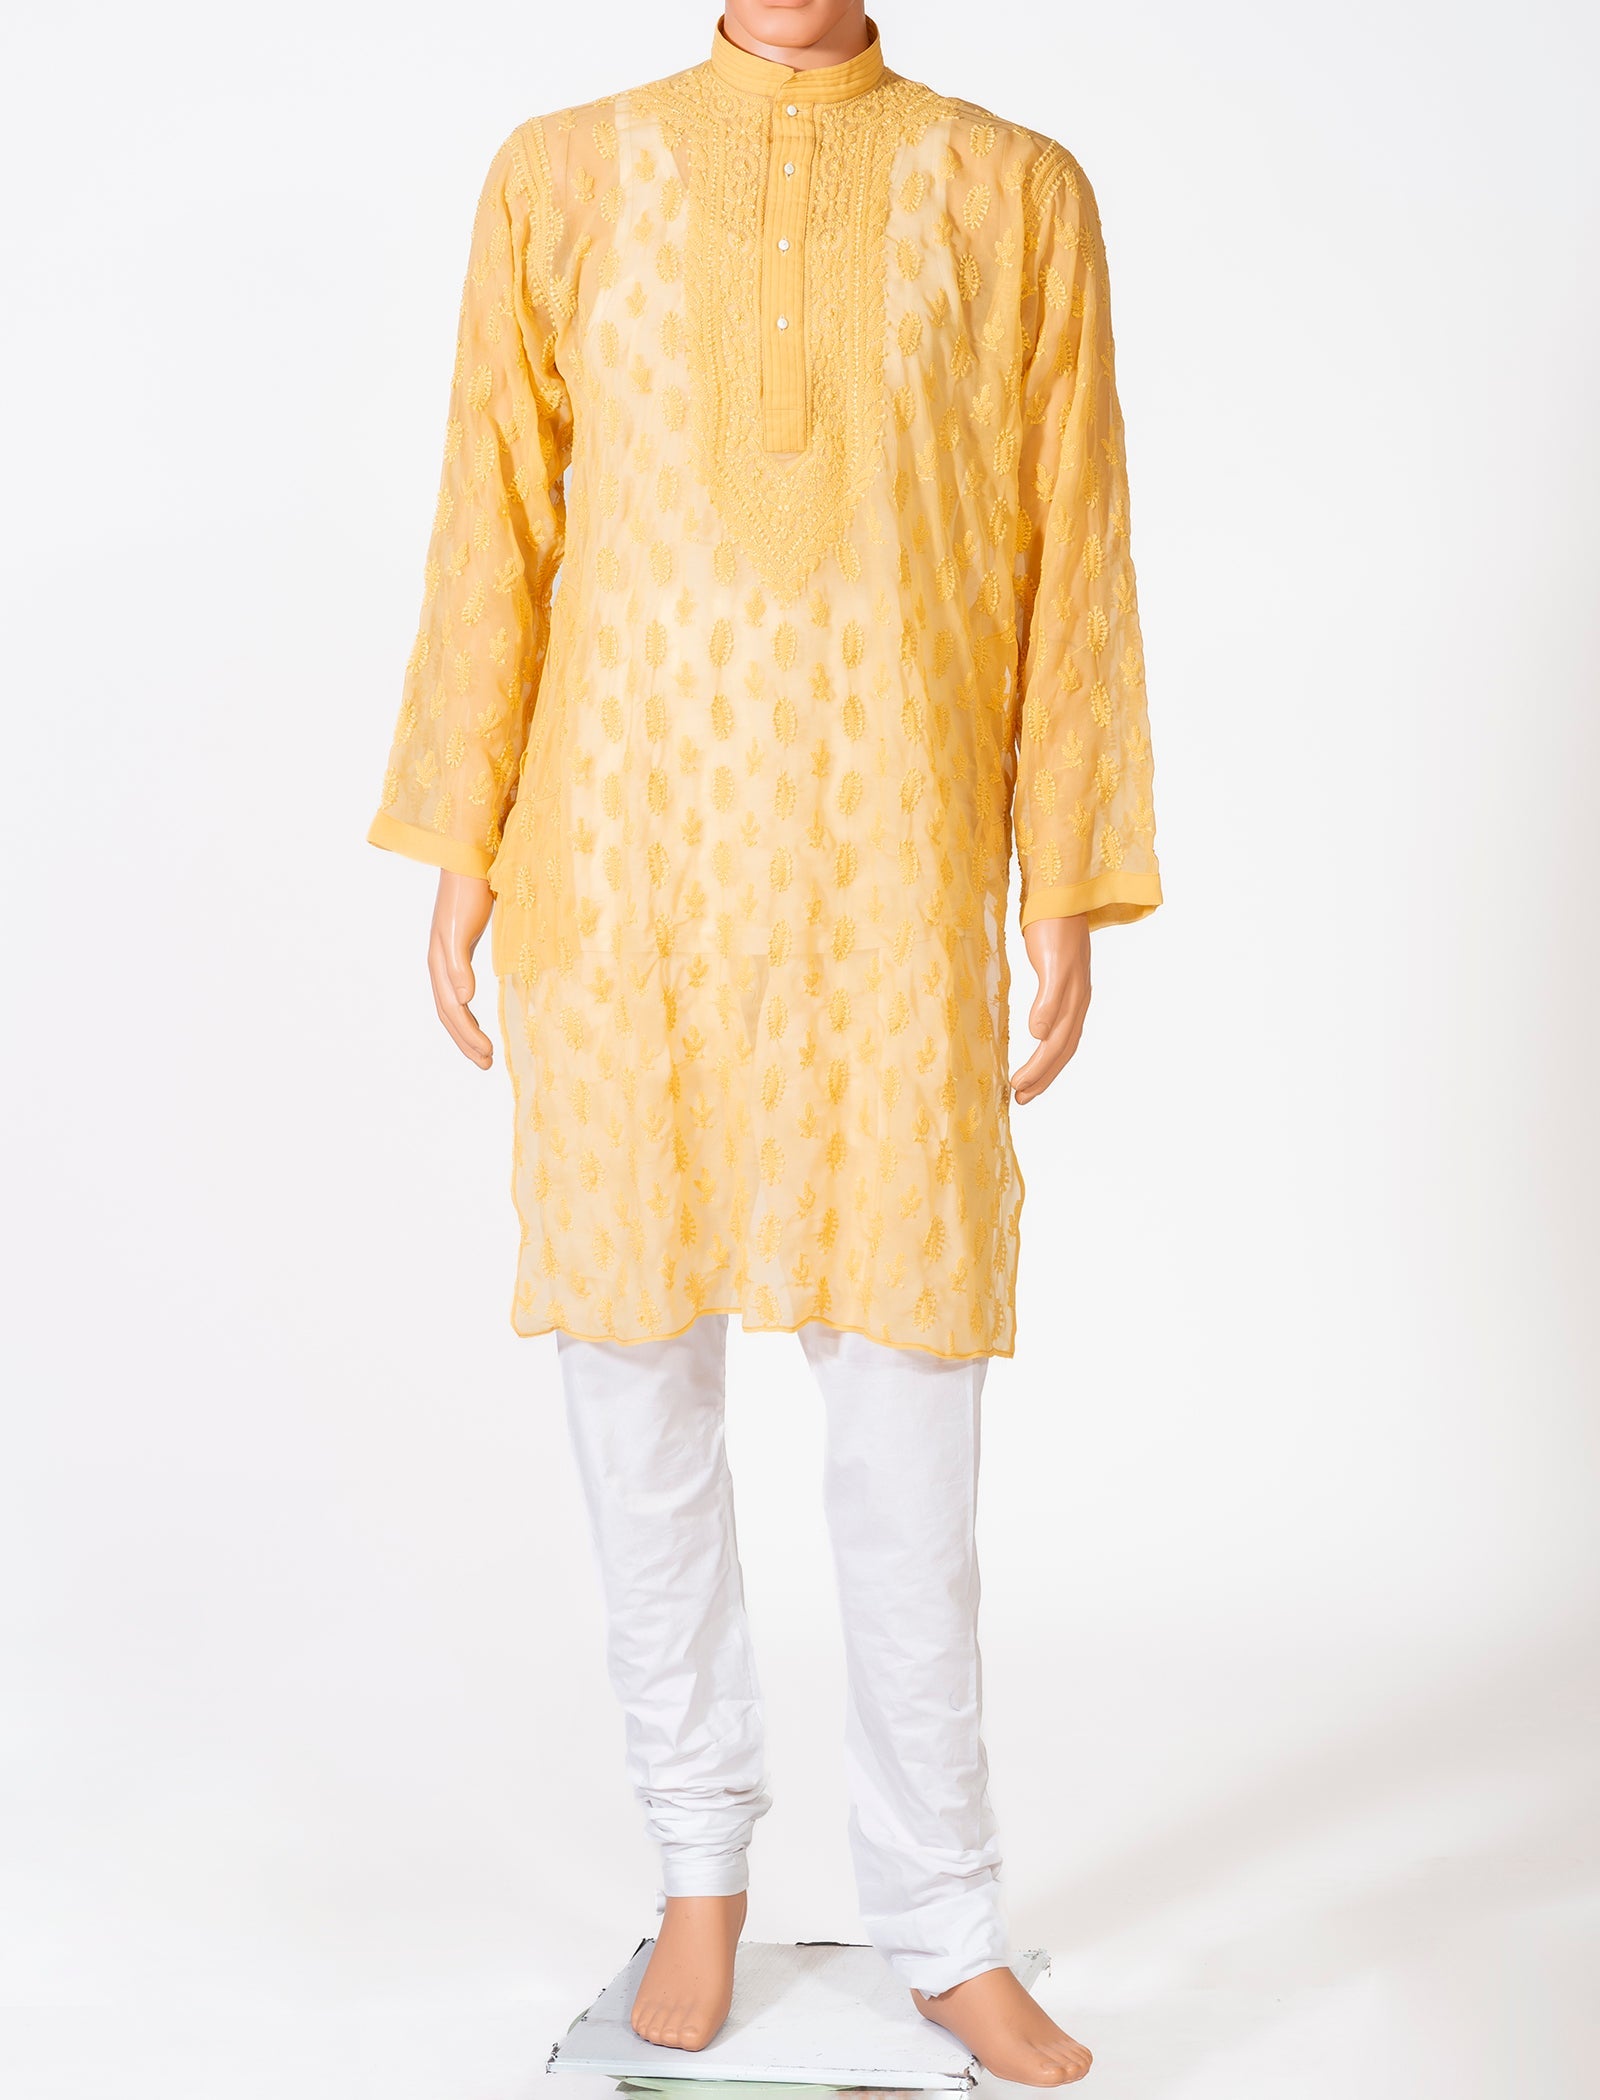 Lucknow Chikan Emporium Georgette Fawn Colour Gents Kurta With Self Stripes And Fancy Hand Chikankari On Neck.